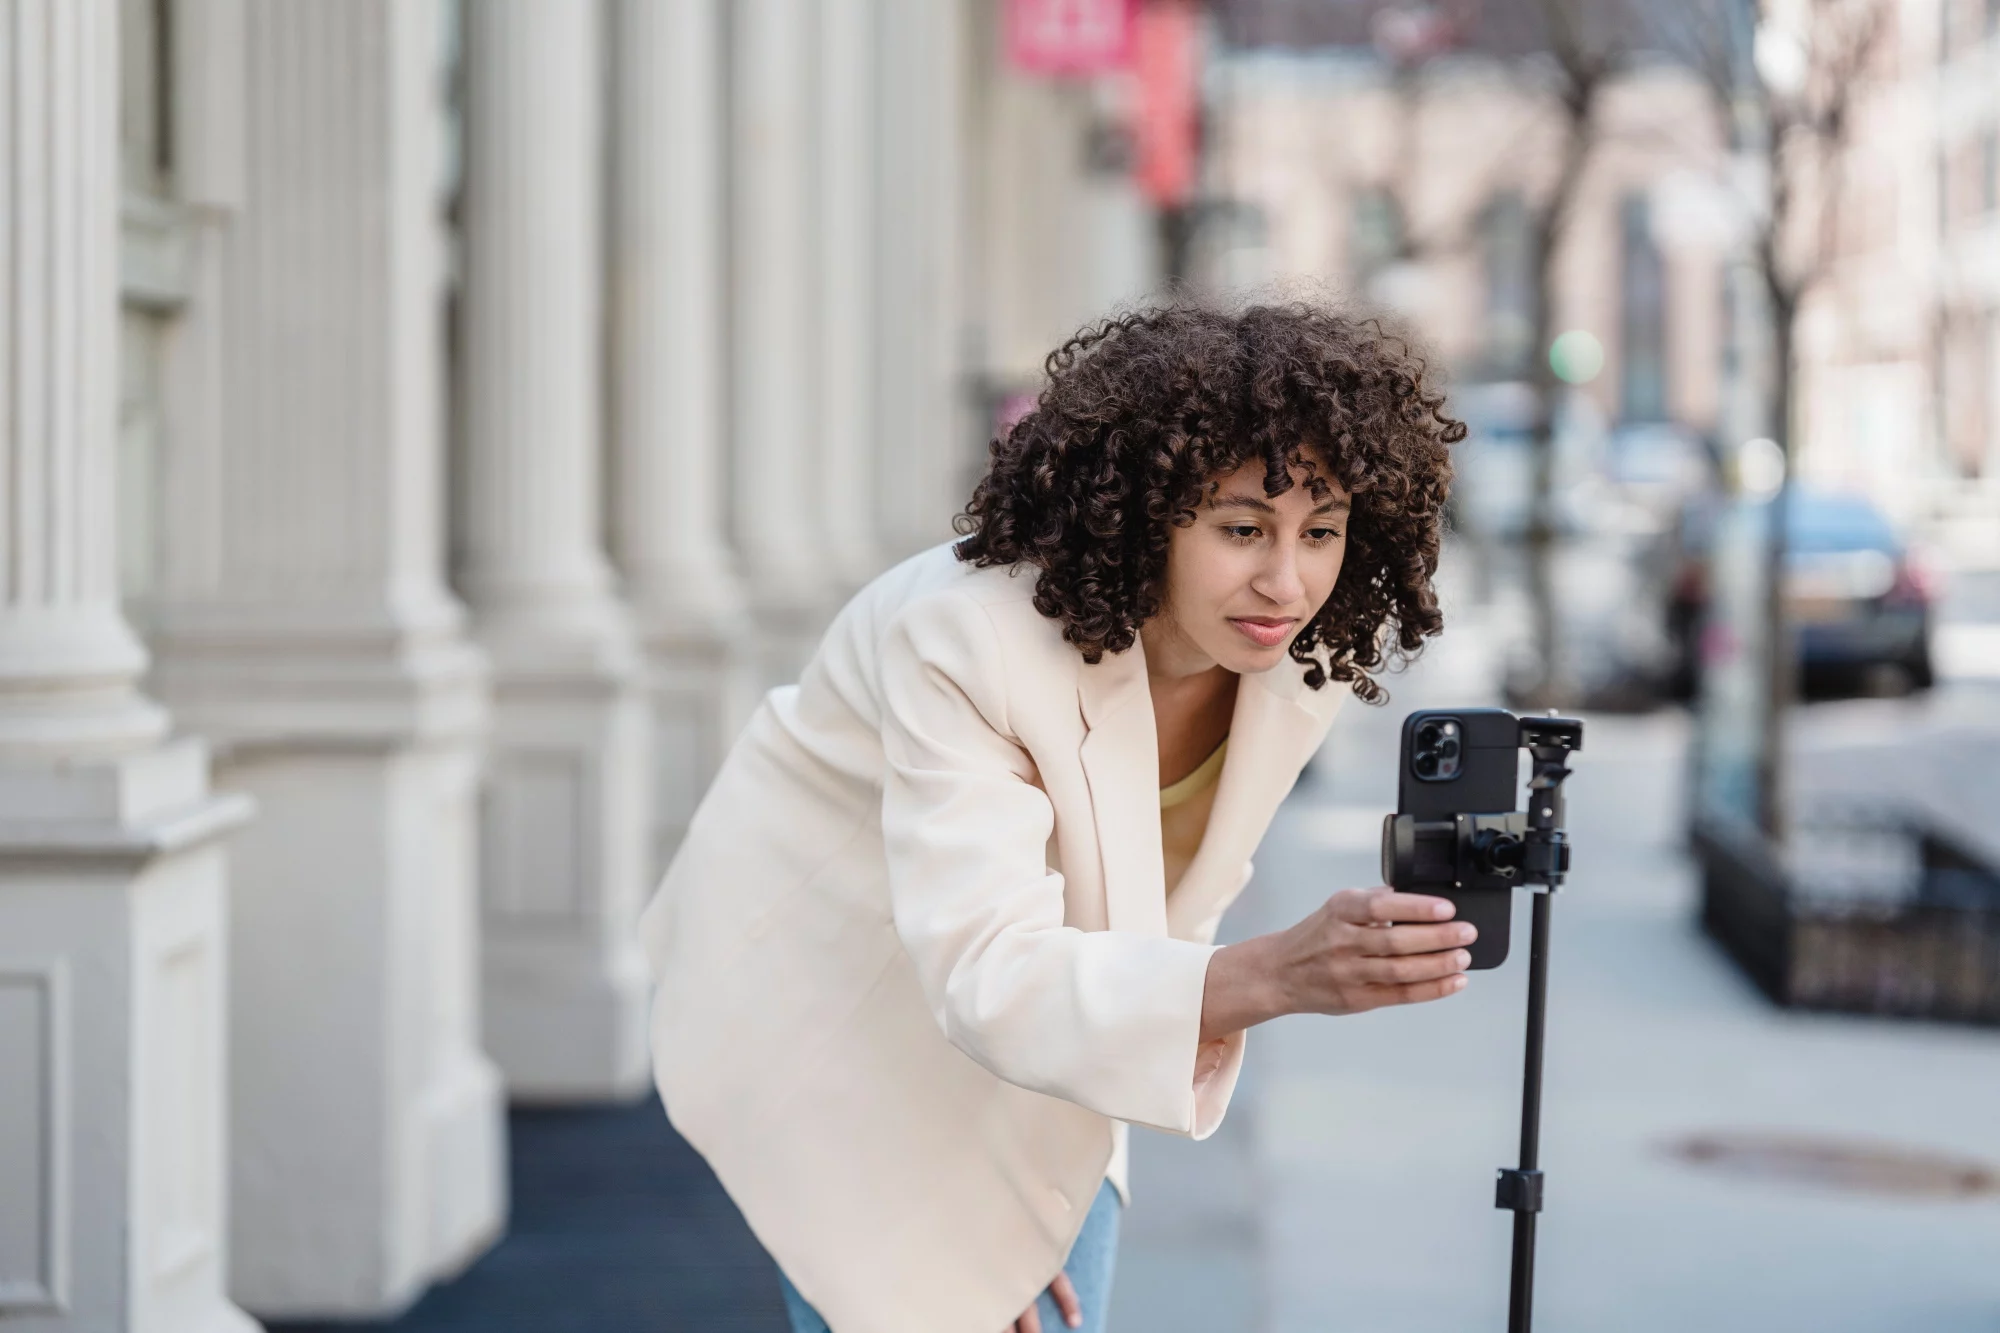 female wearing blazer setting up phone to film on phone stand outdoors